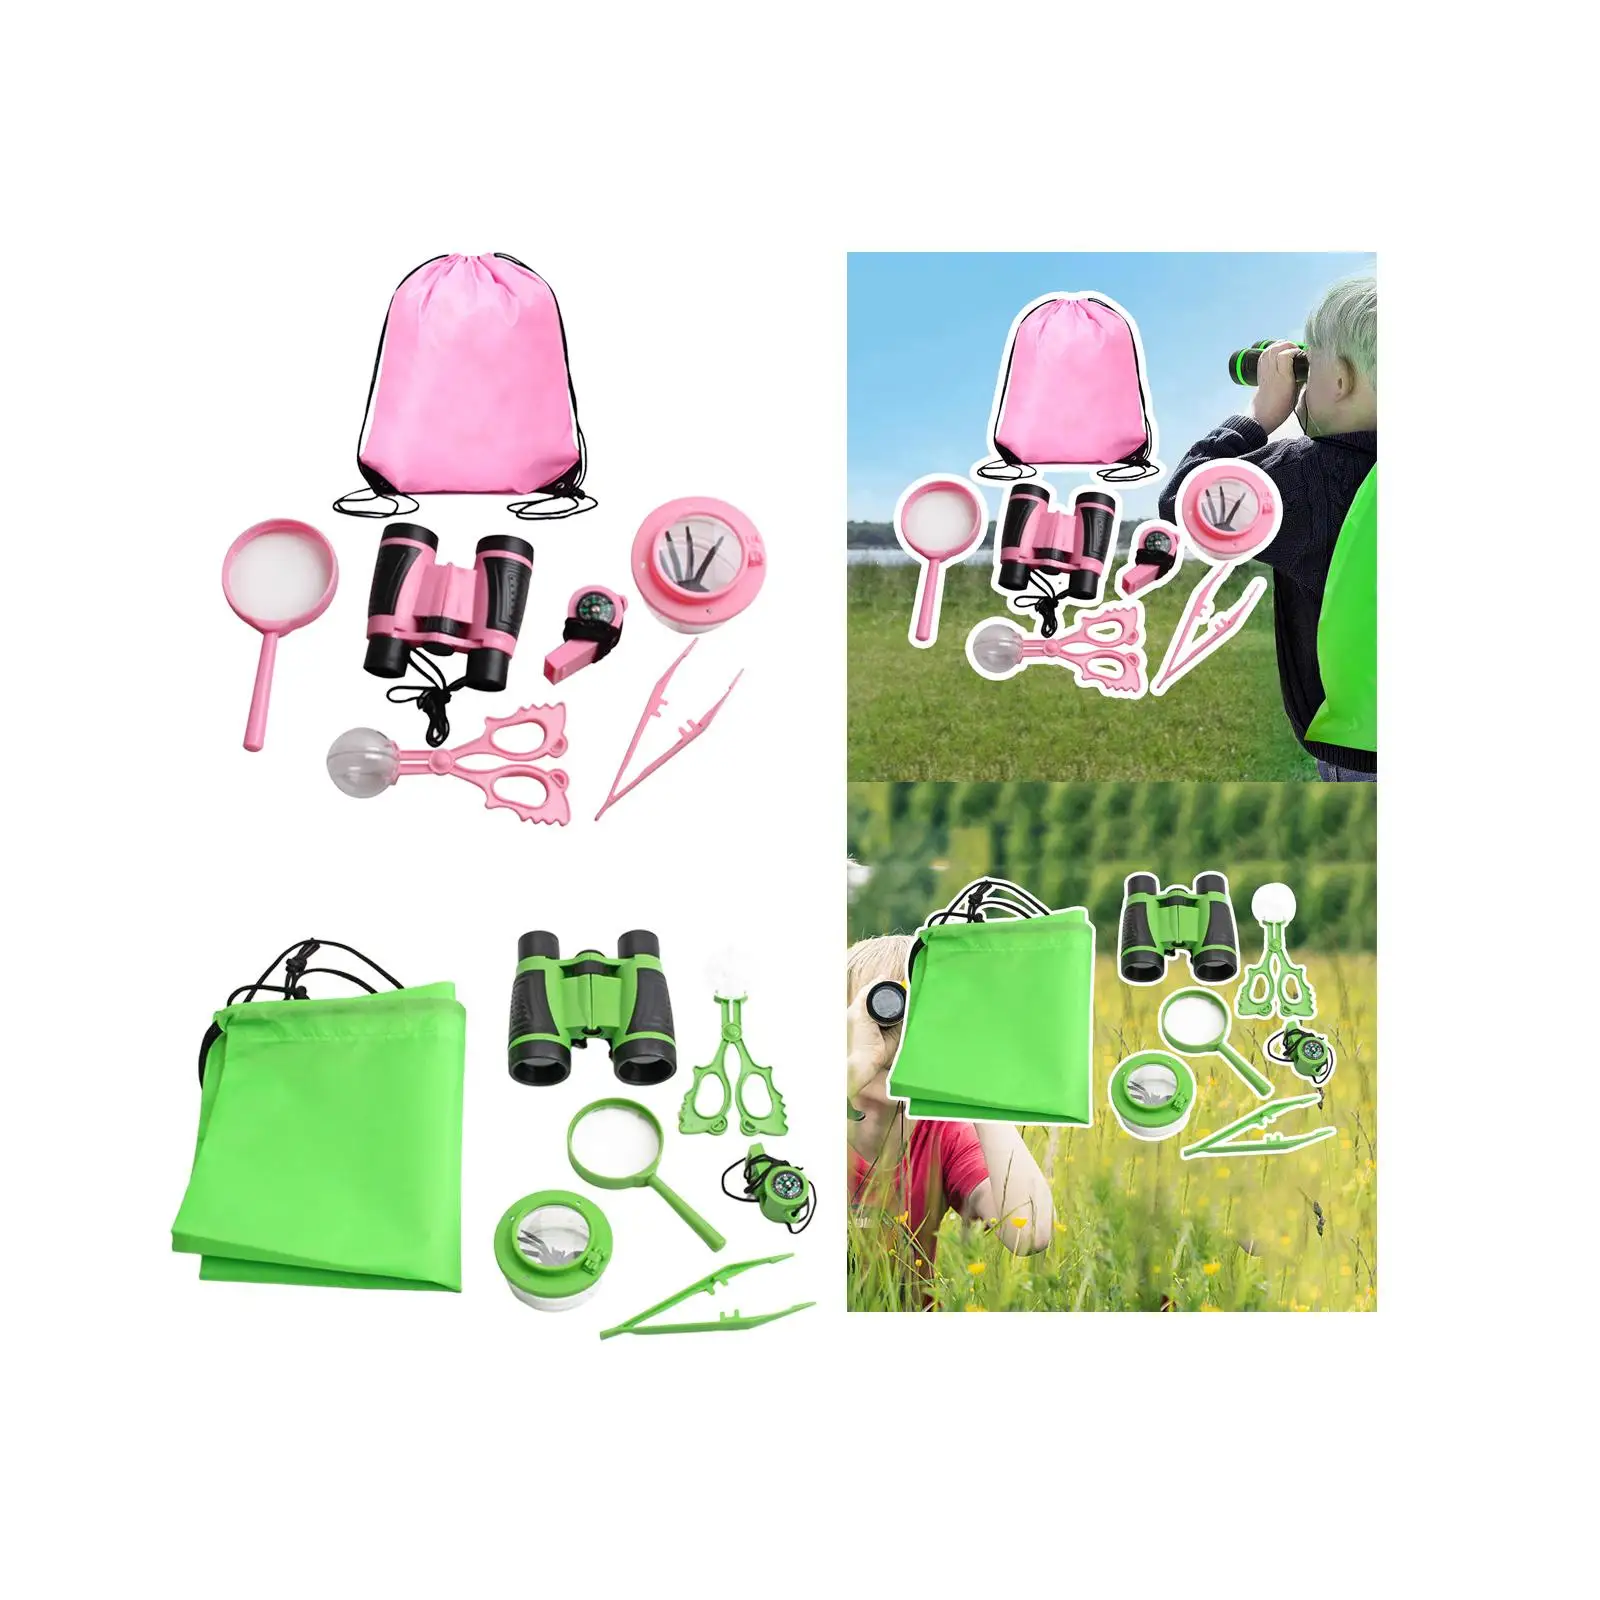 7 Pieces Nature Exploration Kits Whistle for Exploration Projects Plants Animal Learning Backyard Hiking Outdoor Activities